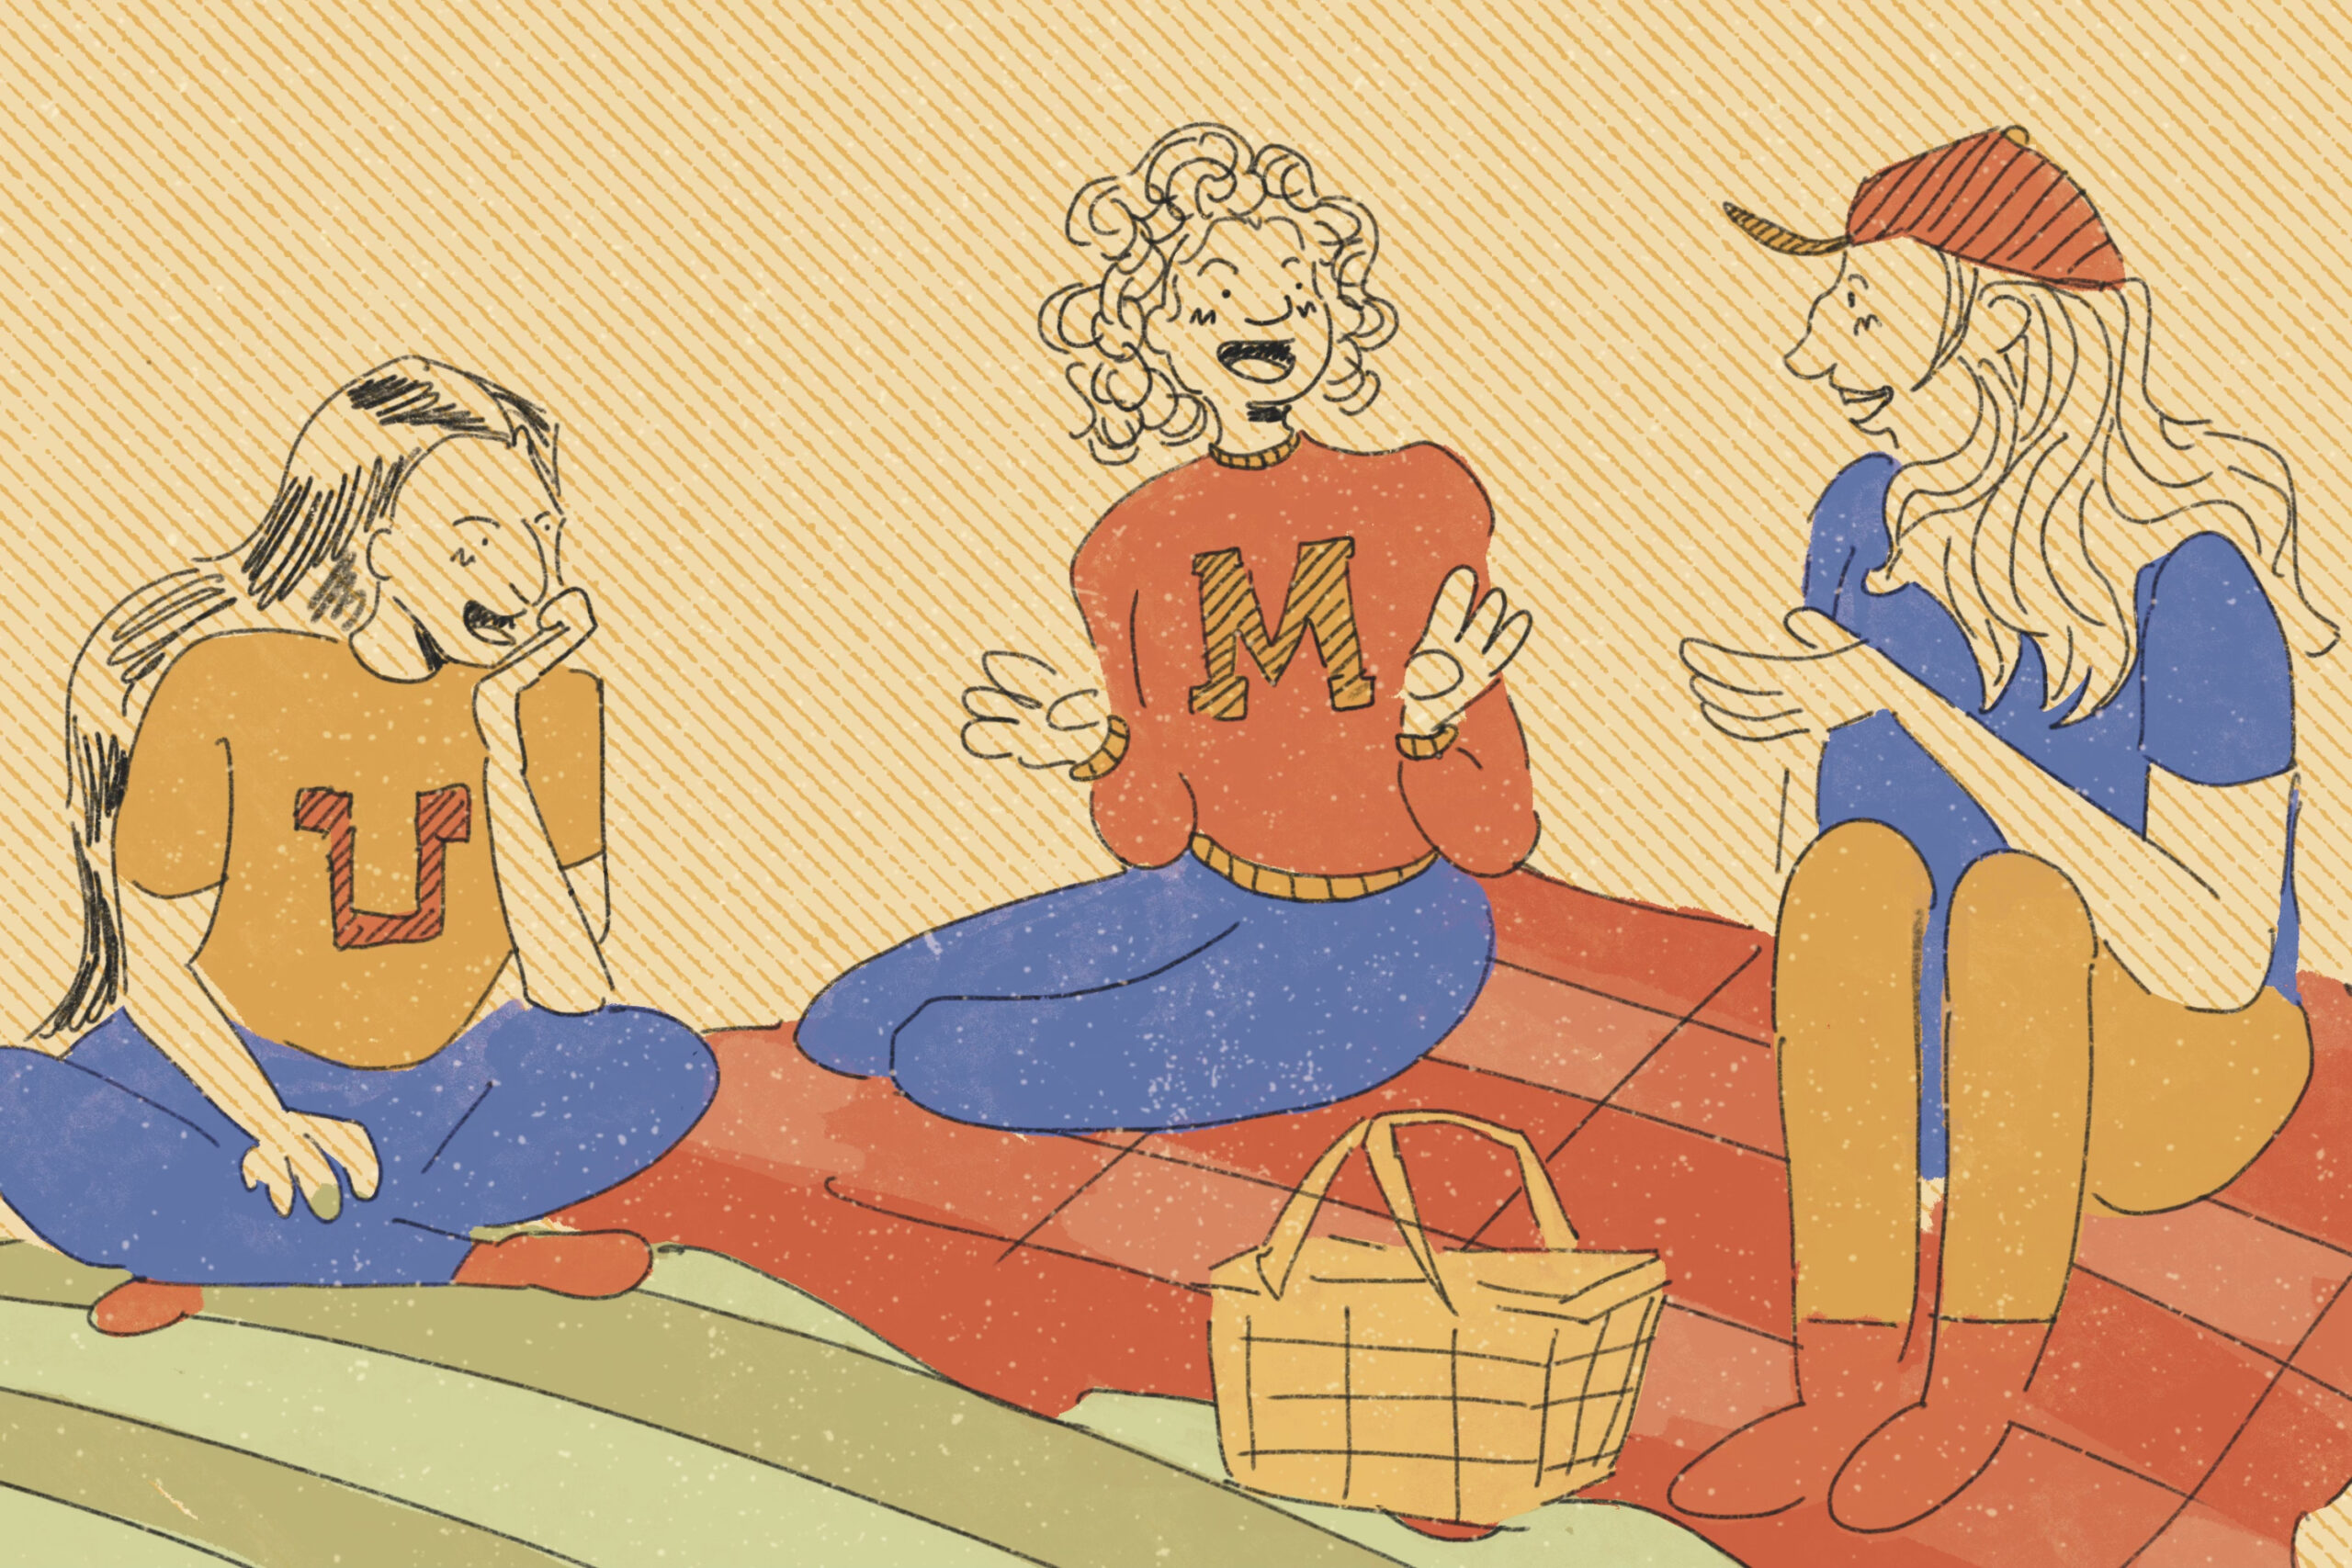 For an article on hang out ideas, three hand drawings of people sitting on picnic blankets, laughing and chatting.